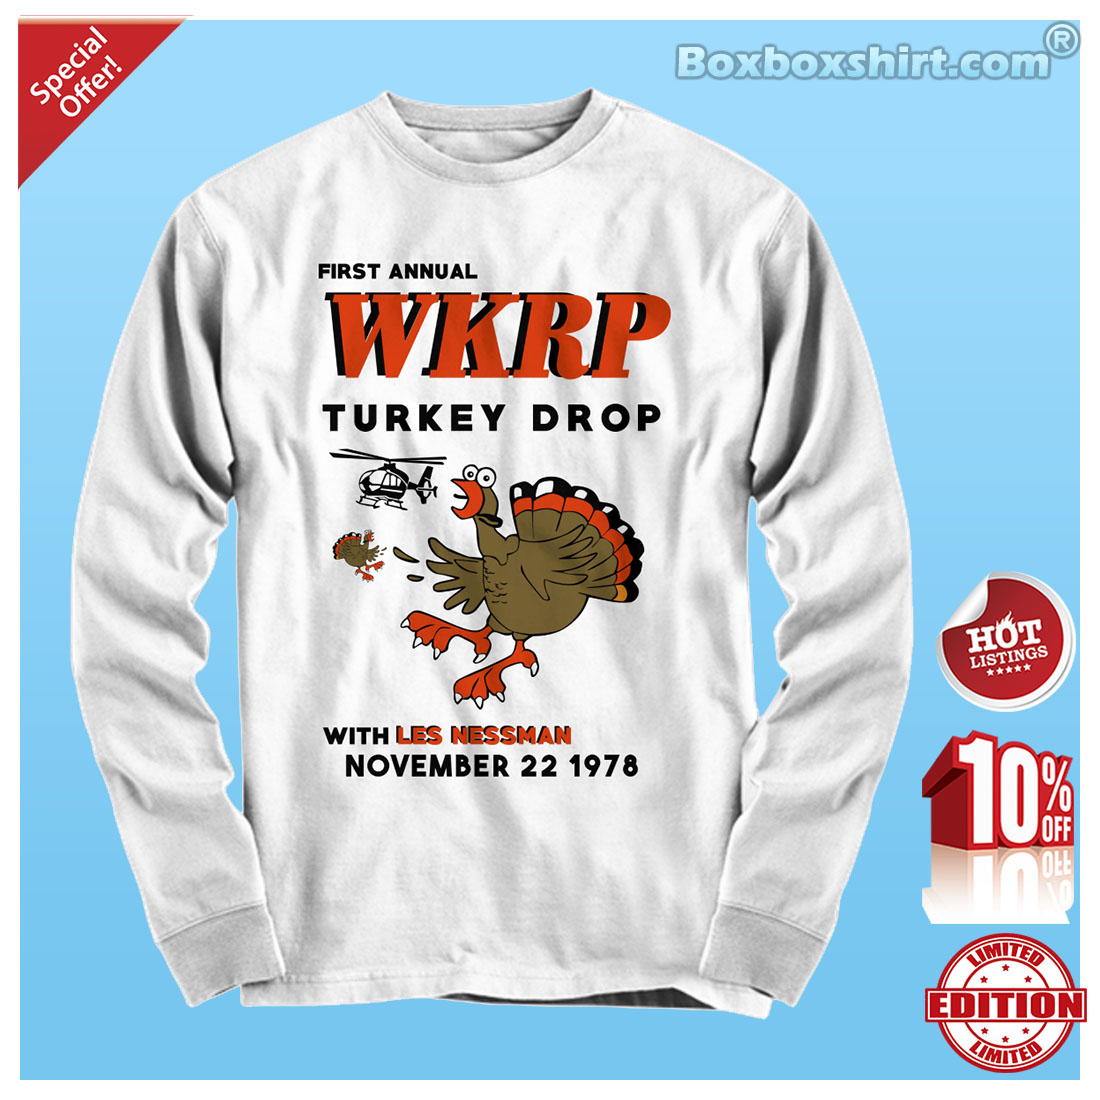 First annual WKRP turkey drop with Les Nessman shirt